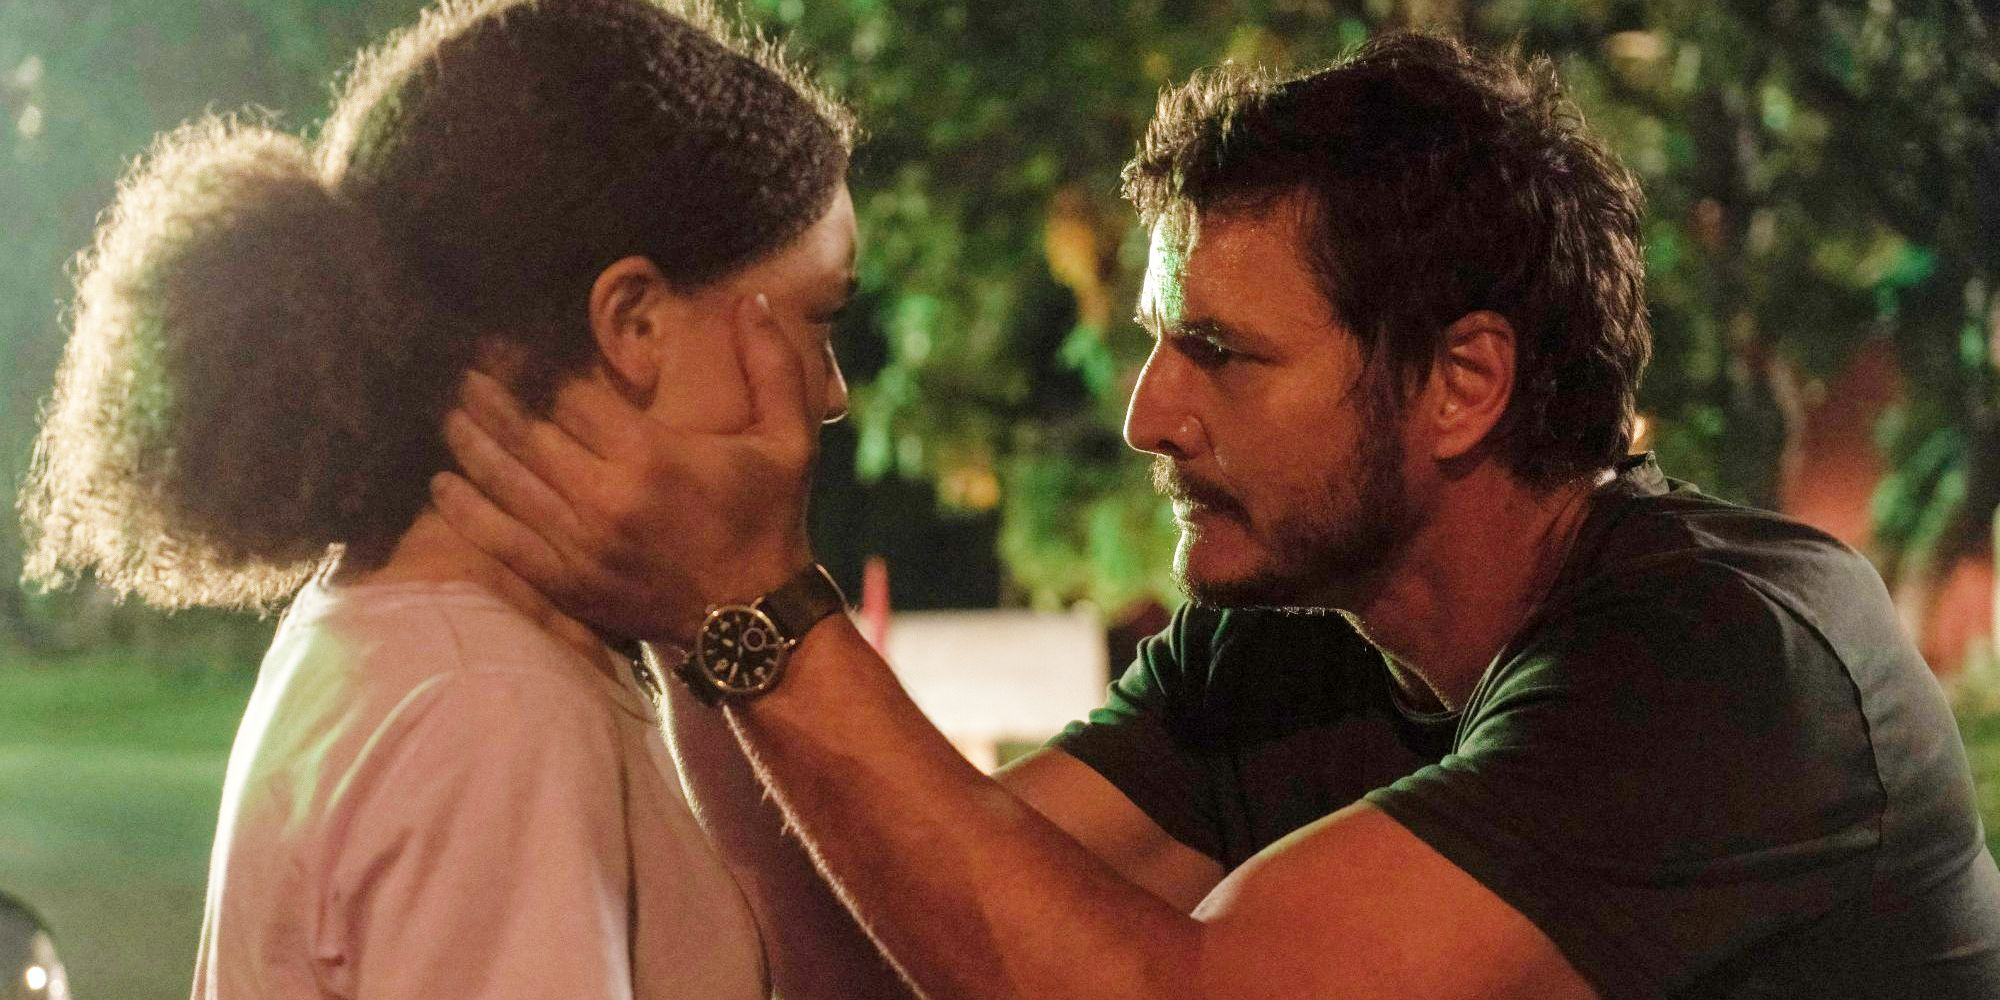 Pedro Pascal as Joel blocks the face of Nico Parker as Sarah in The Last of Us